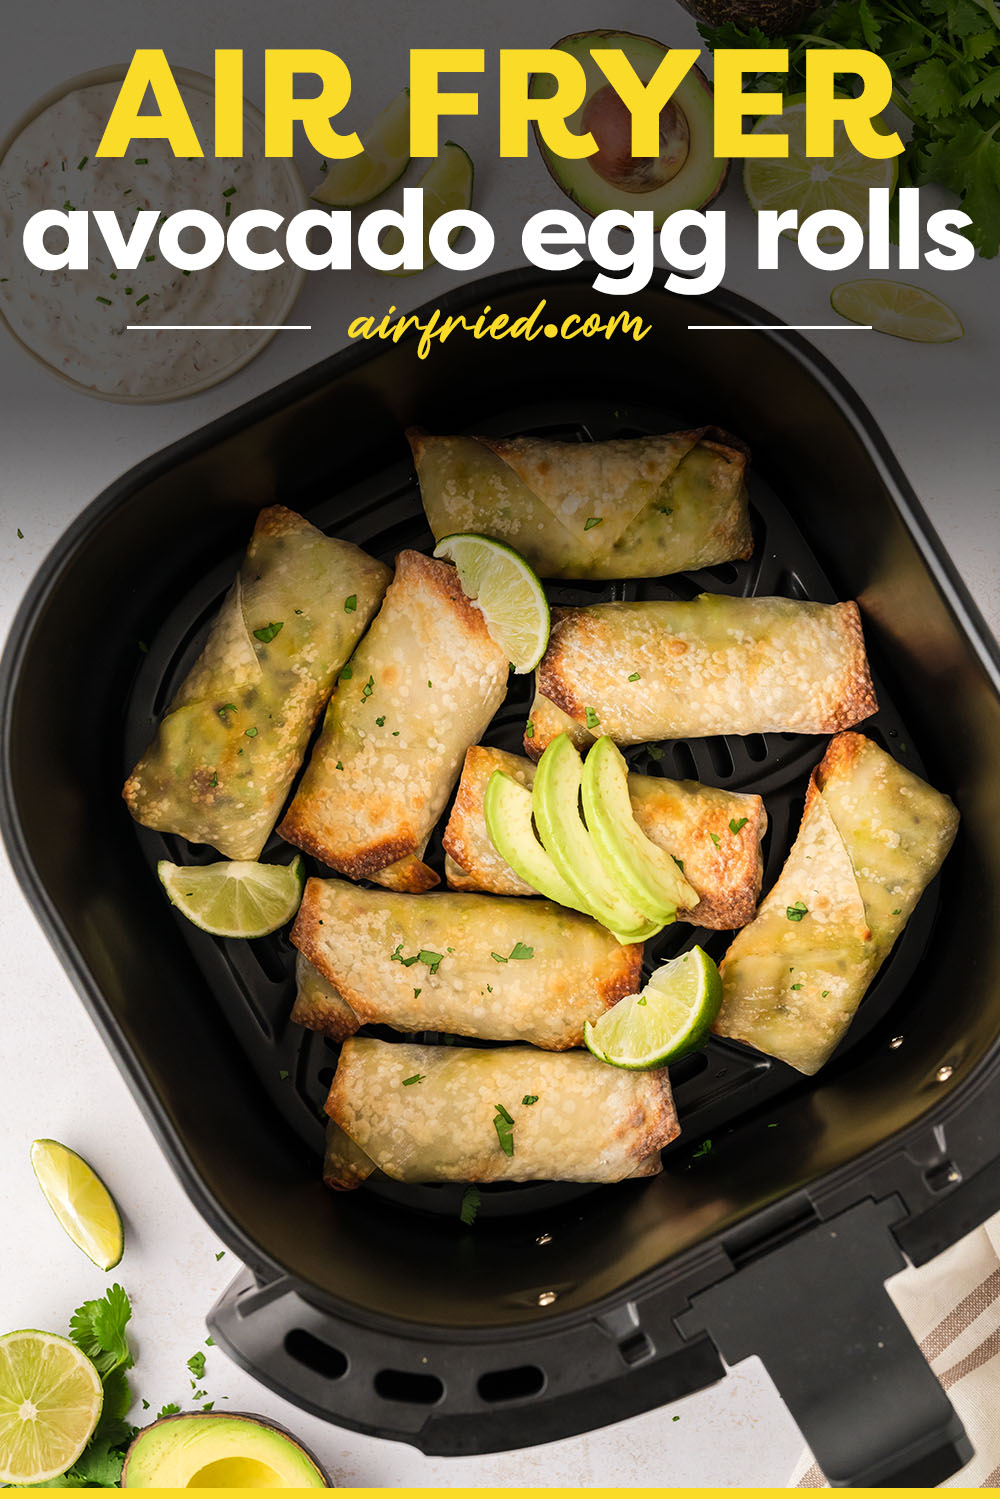 Our crispy on the outside, creamy on the inside Avocado Egg Rolls are made in the air fryer to keep things super simple! These are loaded with fresh avocado, zippy sun-dried tomato, and red onions, all dipped in a homemade chipotle ranch dressing! If you love the egg rolls from the Cheesecake factory, you're going to want to try these!